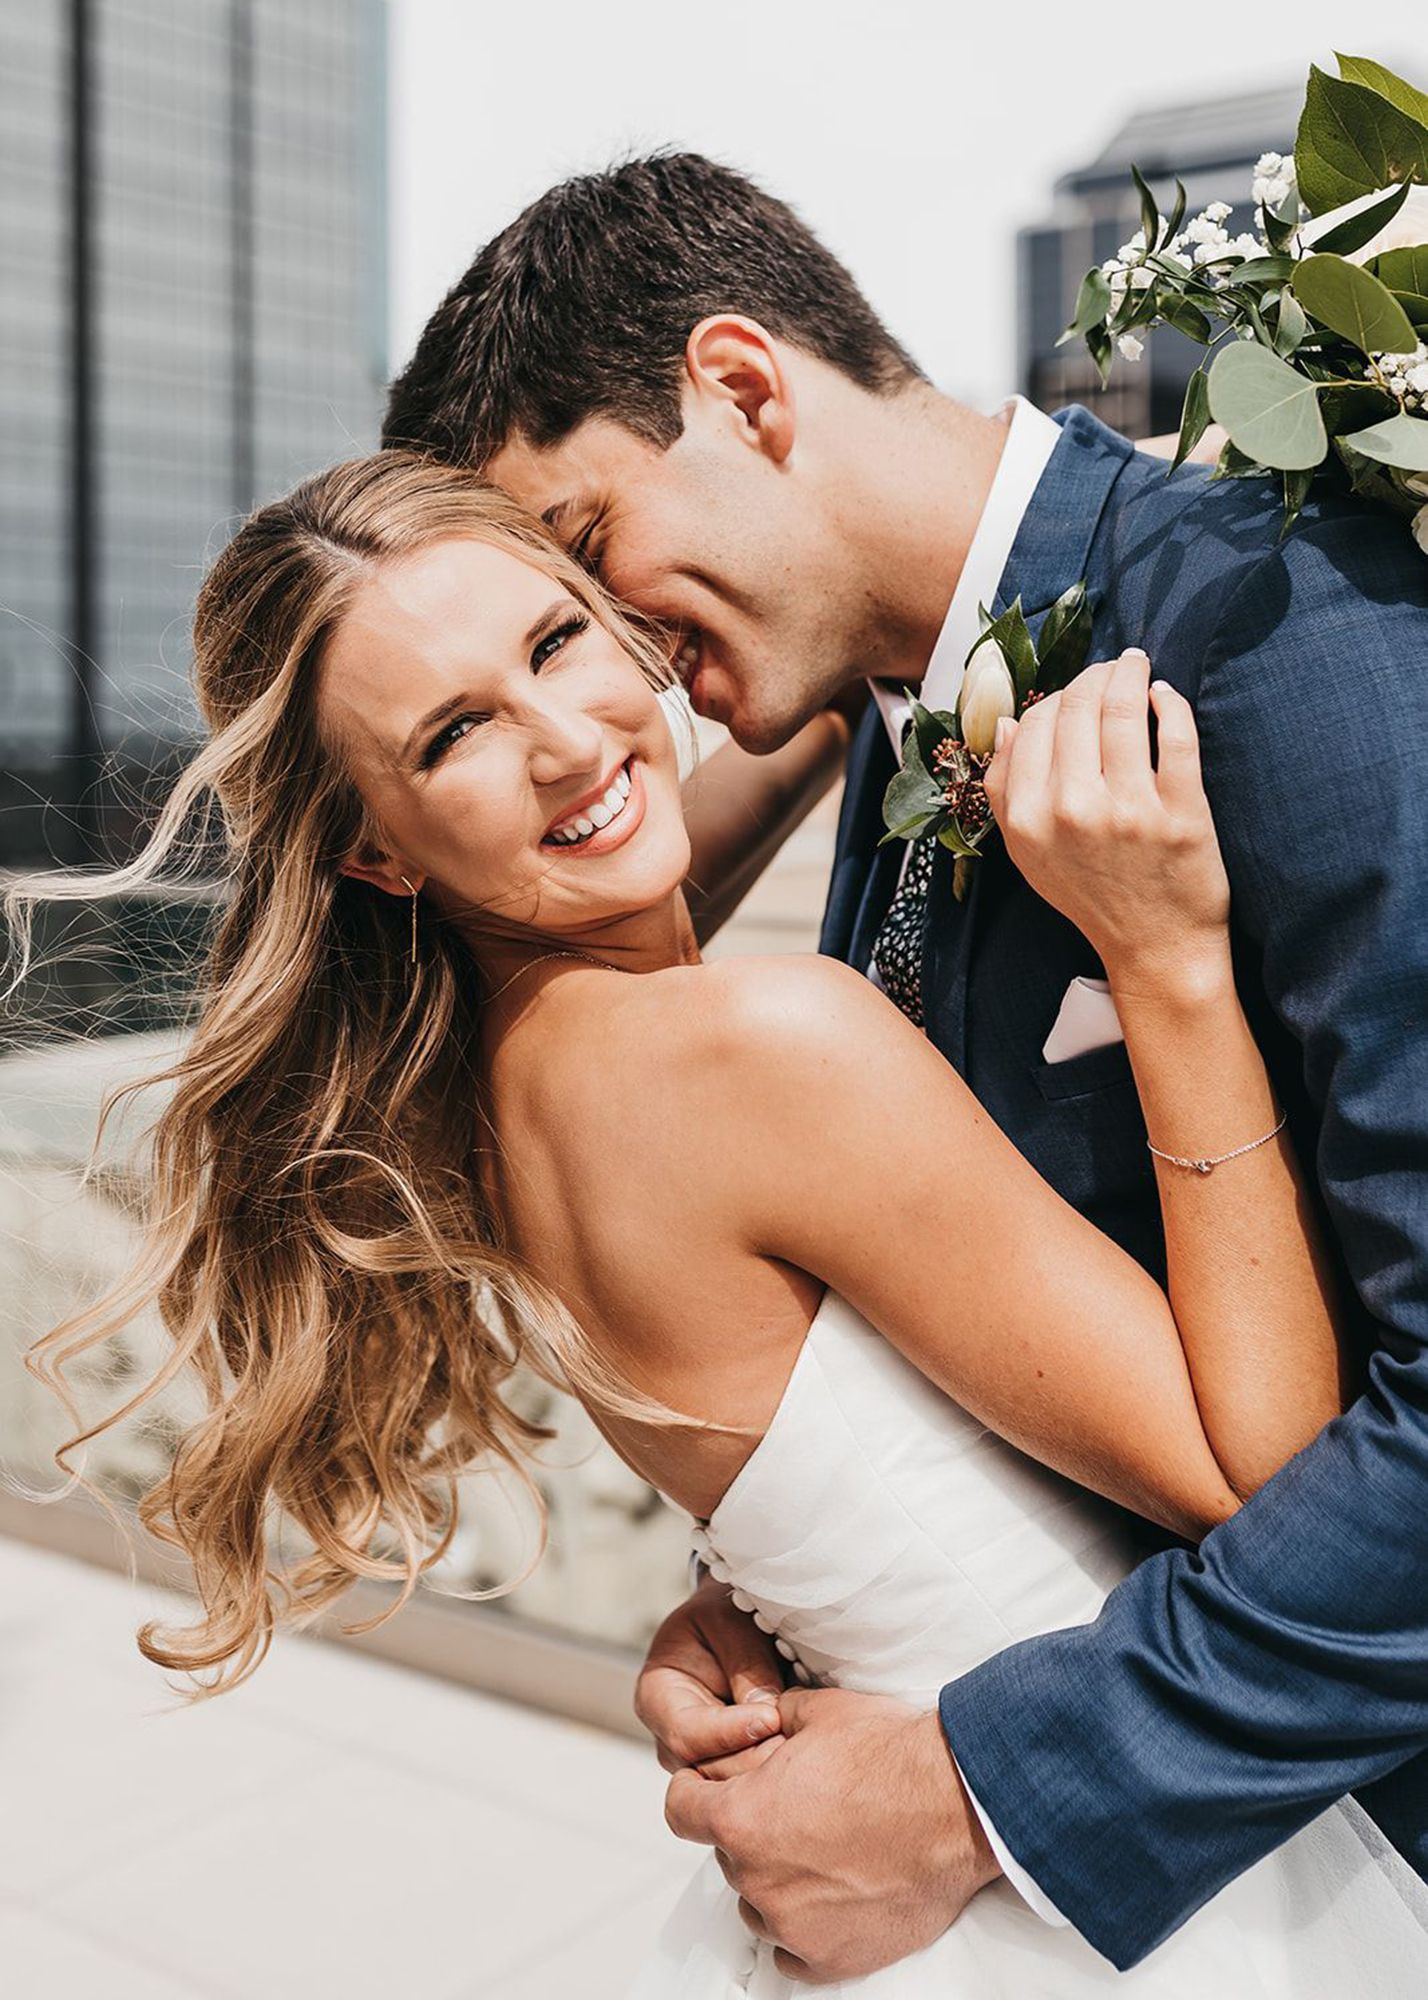 photo of groom in a blue suit and bride embracing during wedding while the bride smiles into the camera